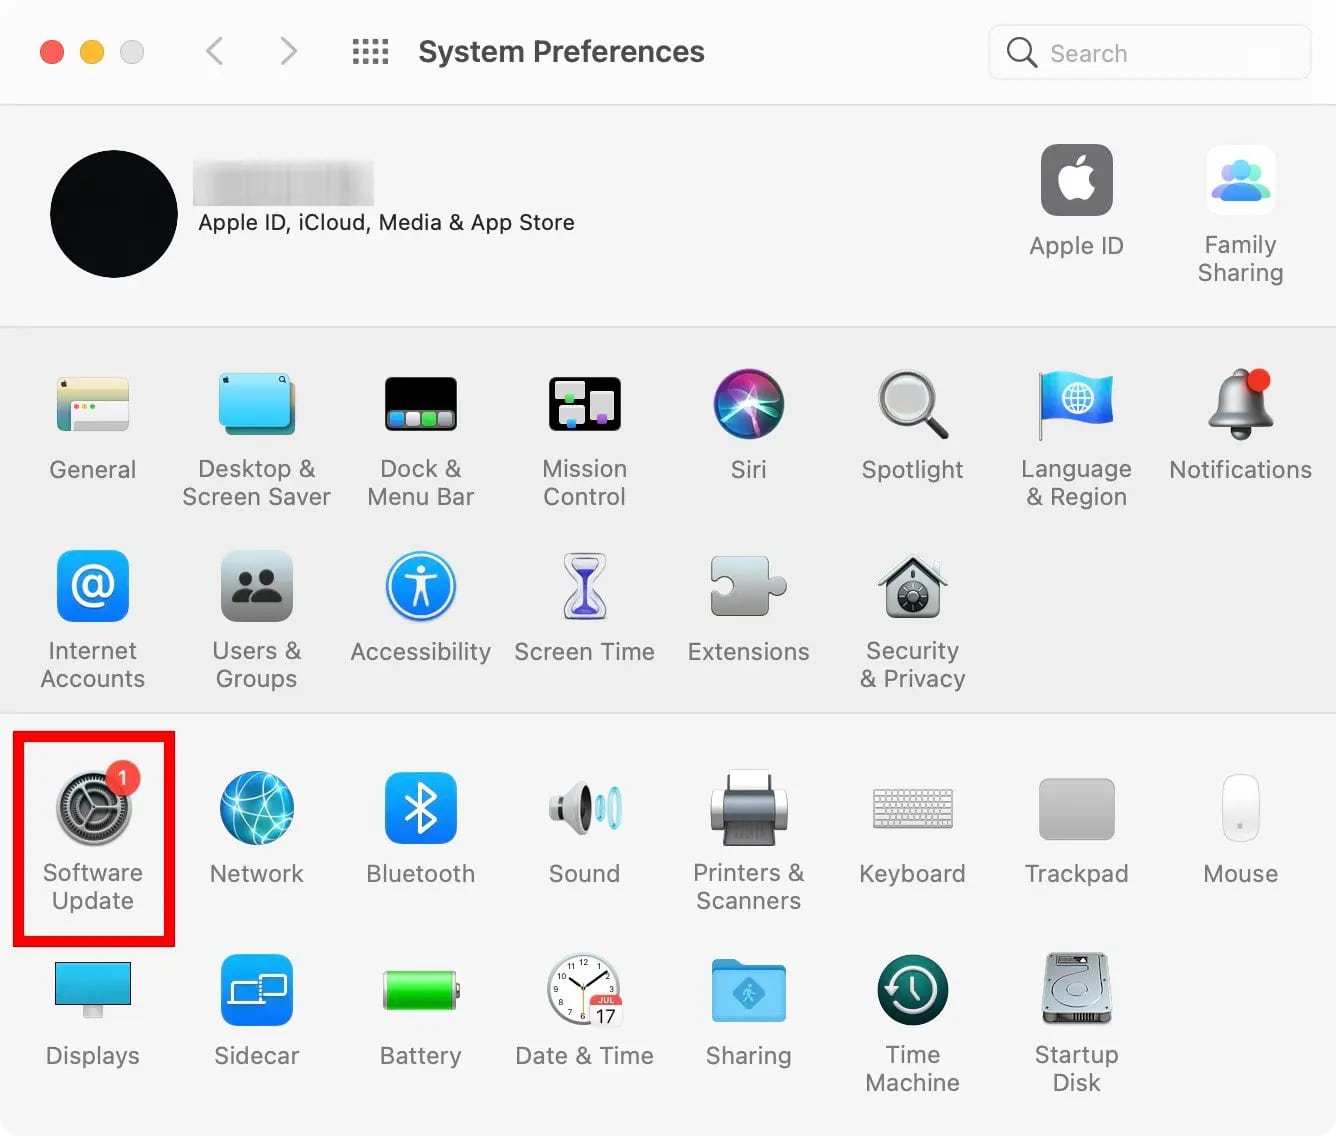 launch software update from system preferences